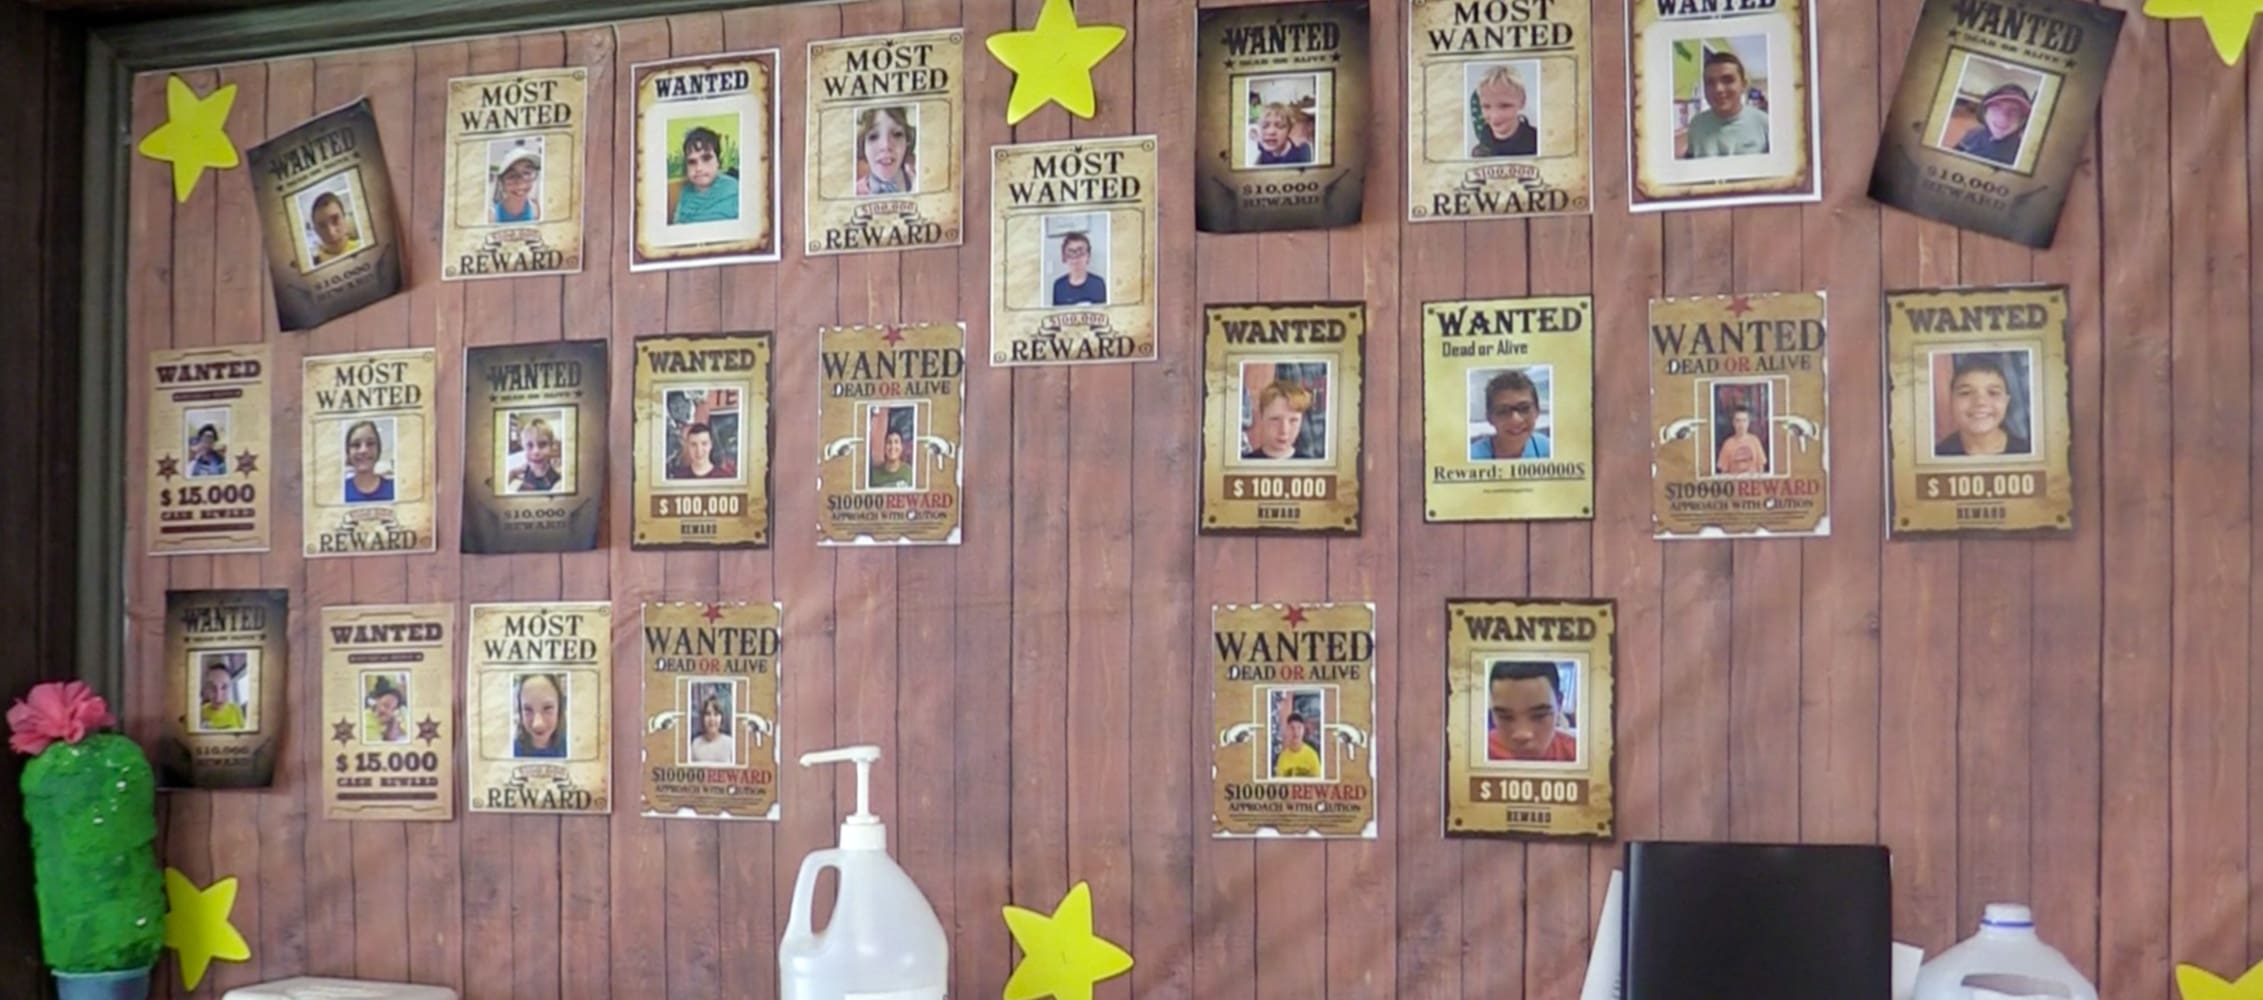 In line with Camp Lenape's theme this year, the campers each have their own "wanted" posters.